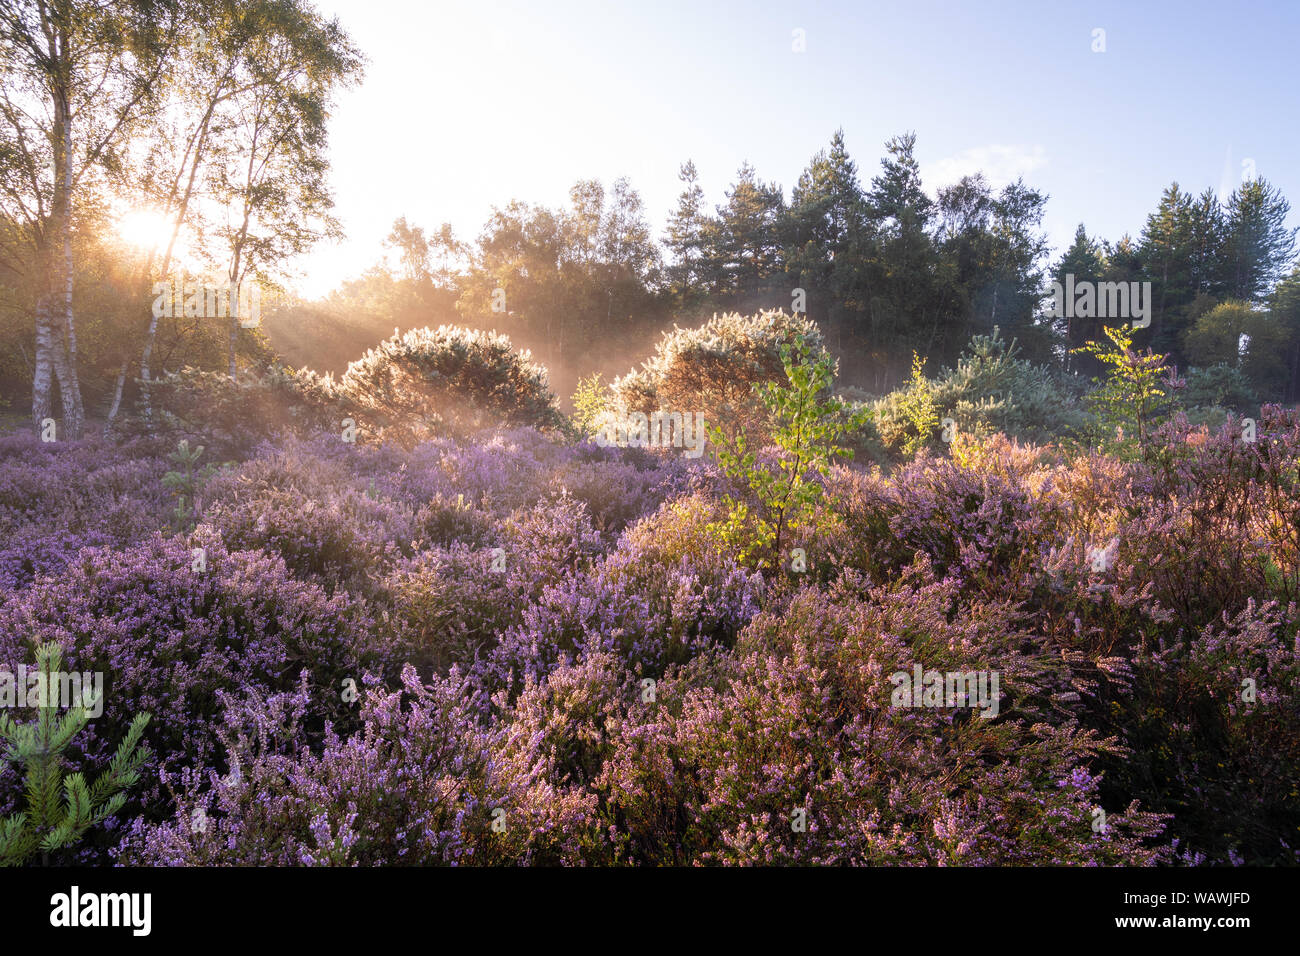 Lowland heath landscape at Crooksbury Common in Surrey, UK, on a summer morning with colourful flowering heather Stock Photo